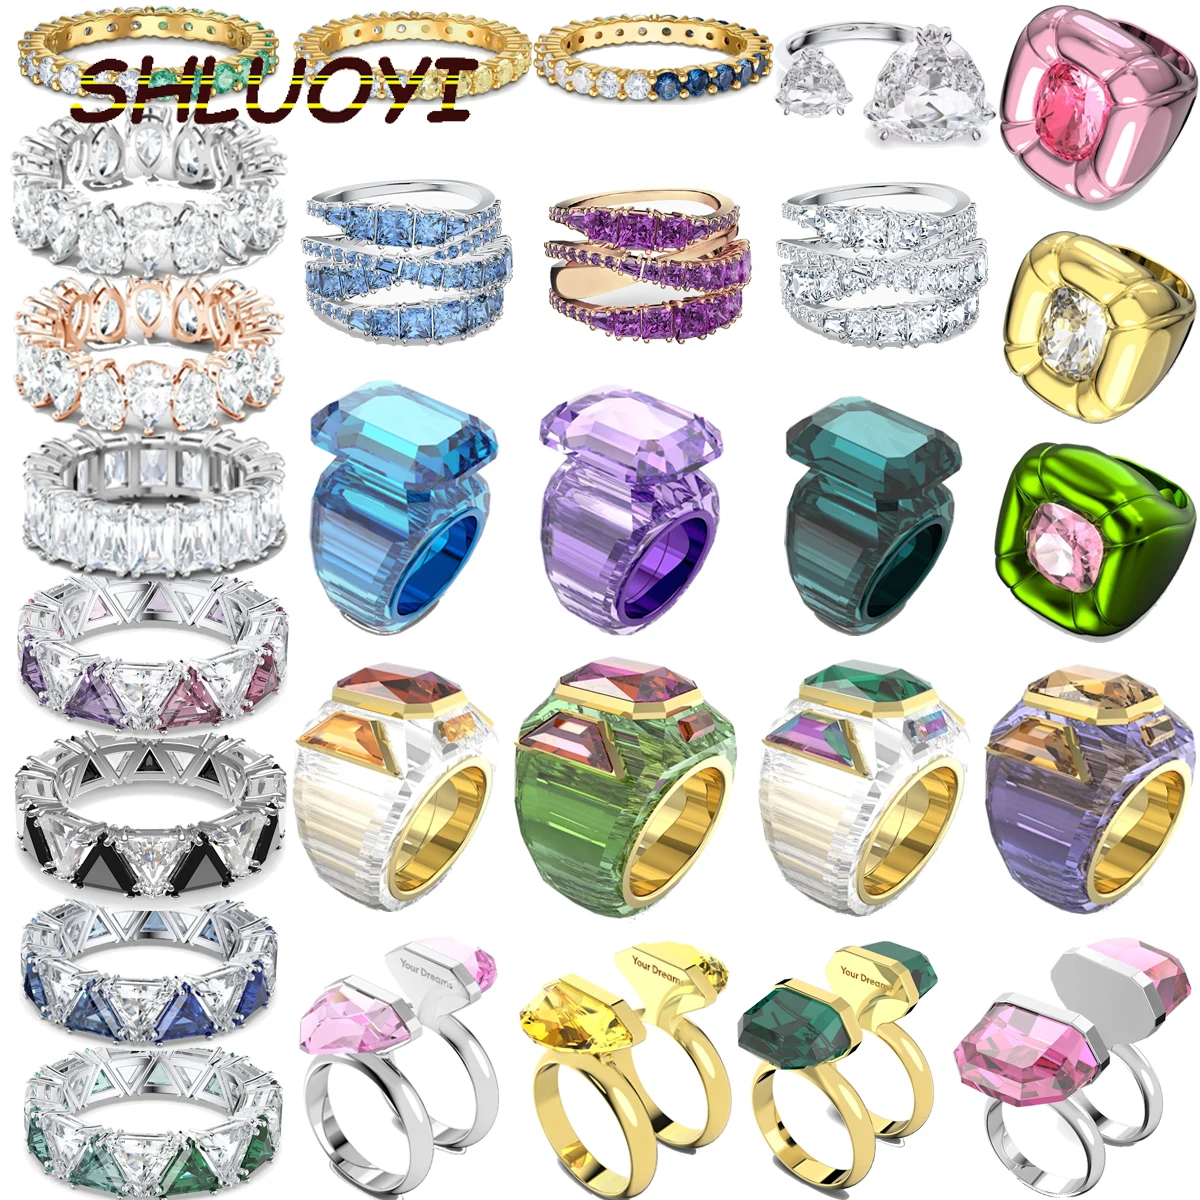 

Original 2023 SWA Fine Jewelry High Quality 1:1 Austrian Crystal New Charming Twisted Geometric Ladies Exquisite Rings Romantic